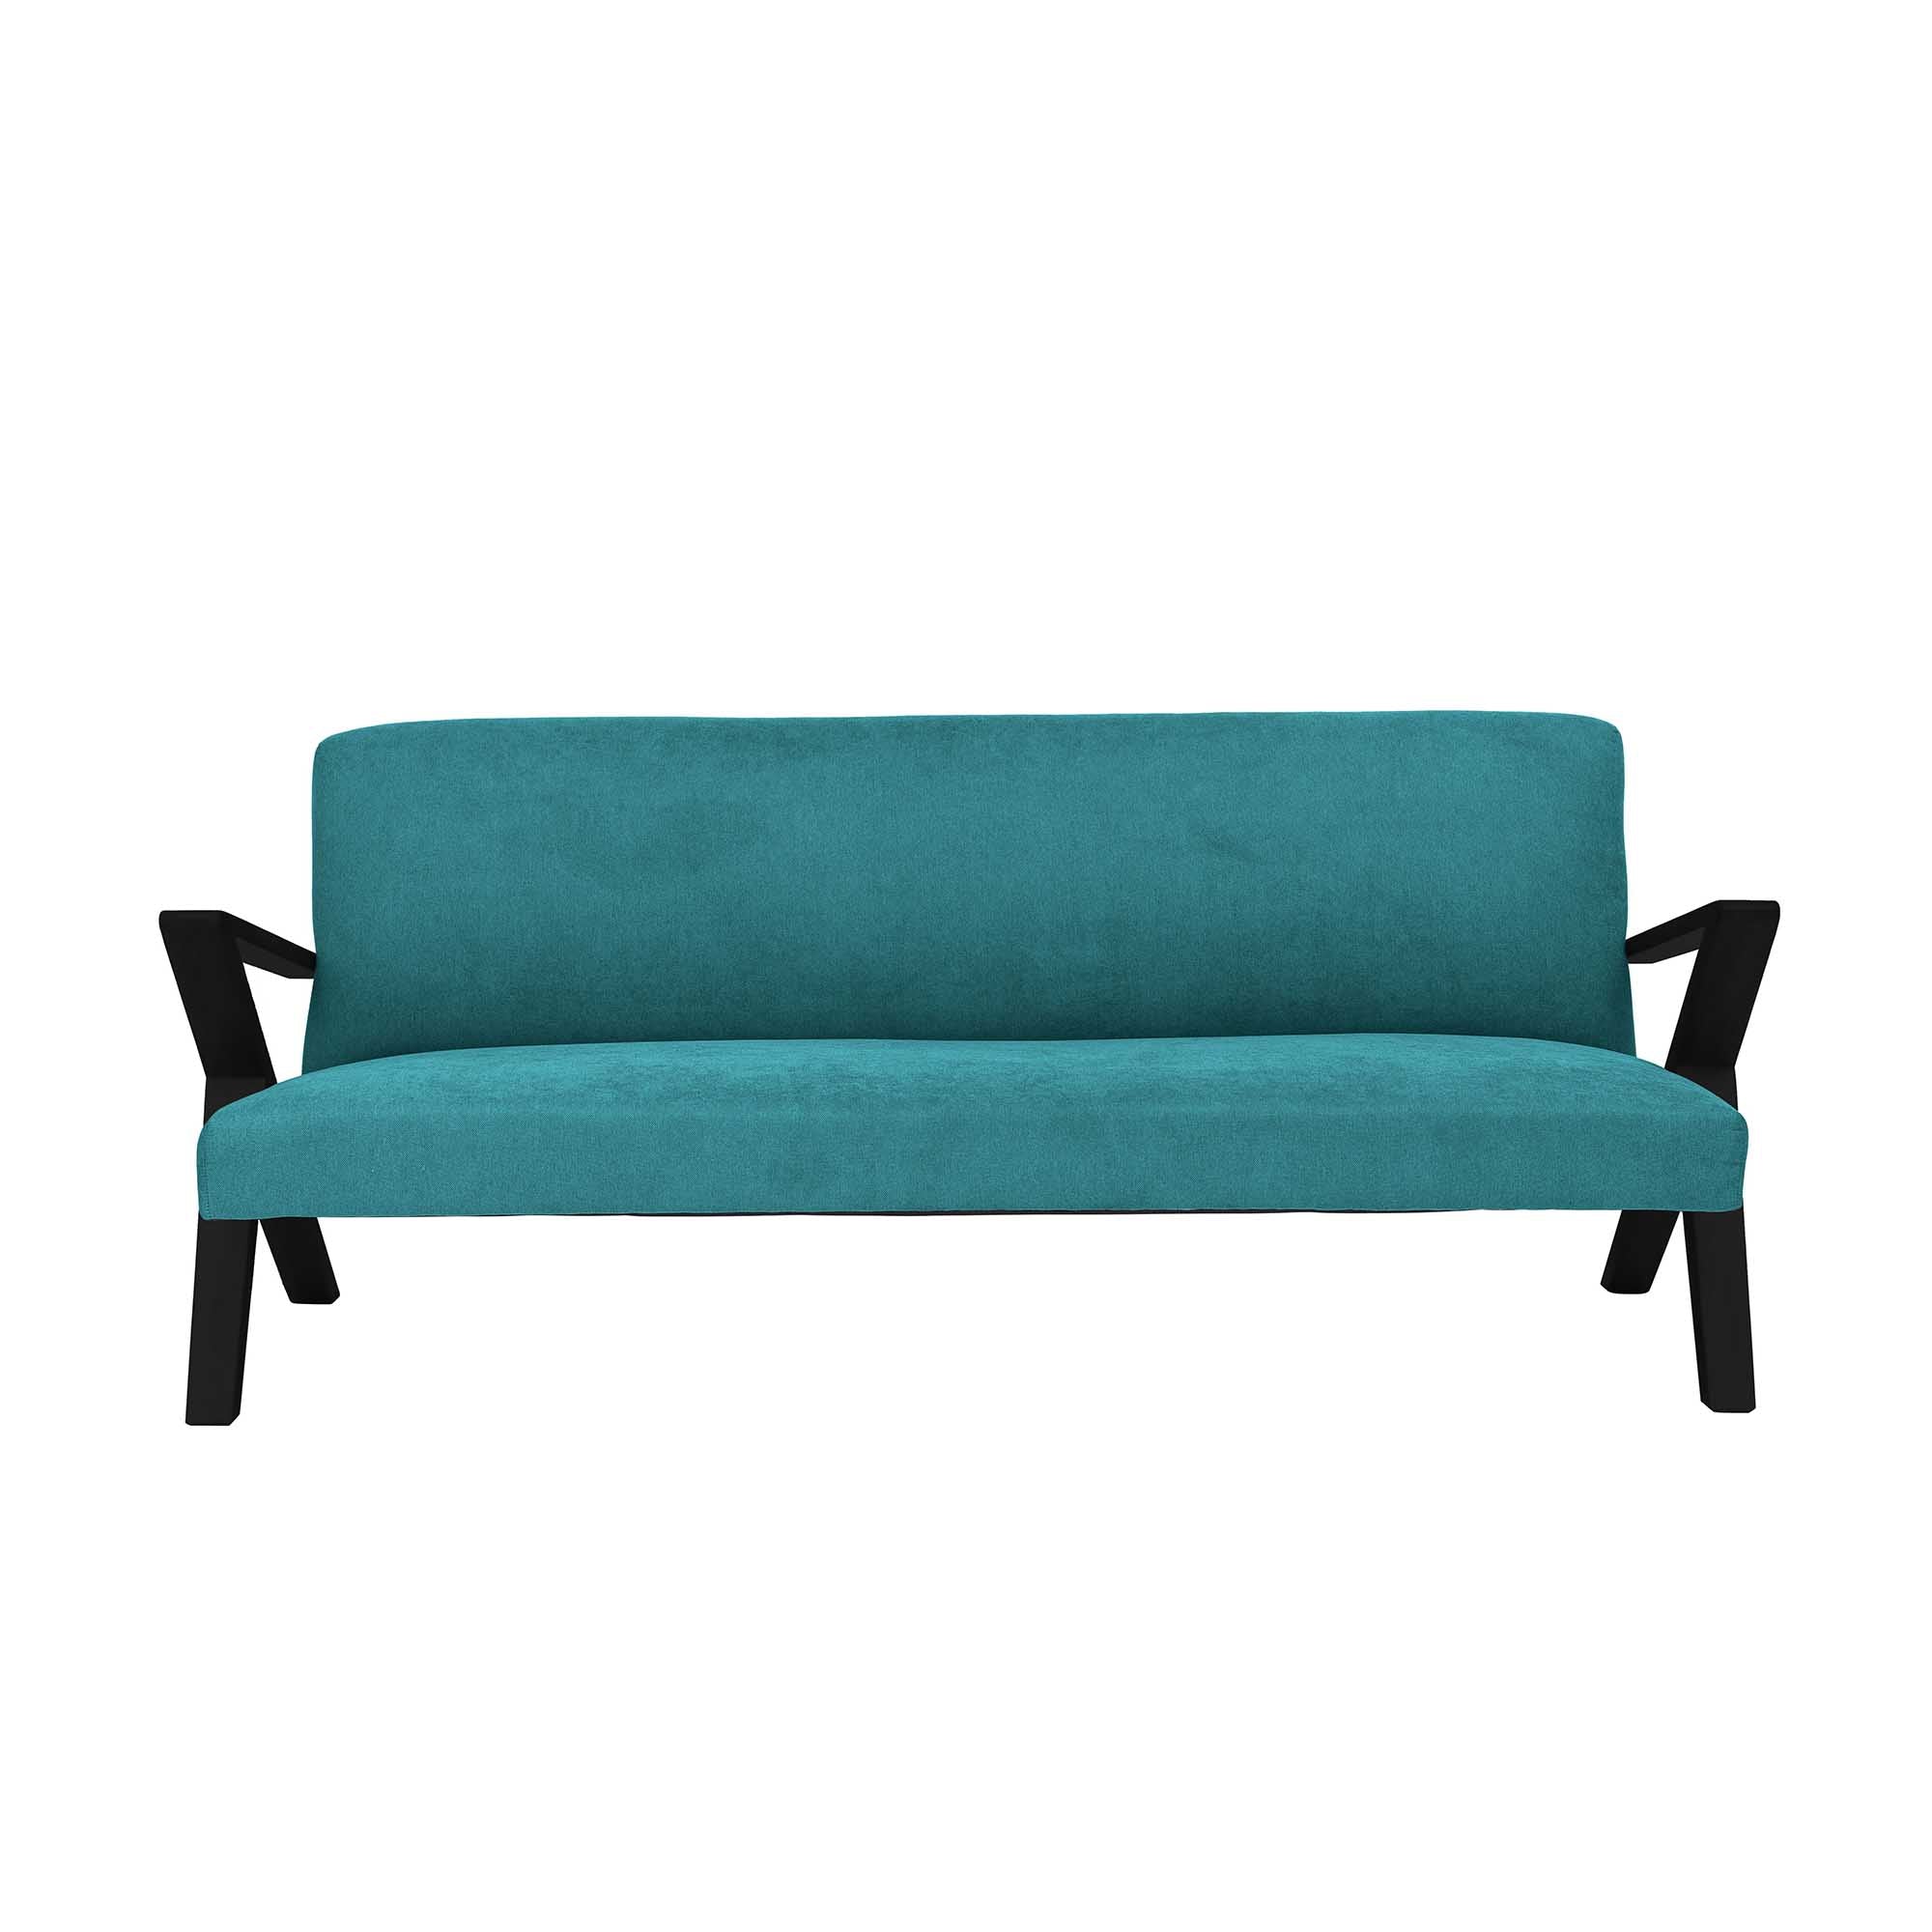  4-seater Sofa Beech Wood Frame, Black Lacquered blue fabric, front view